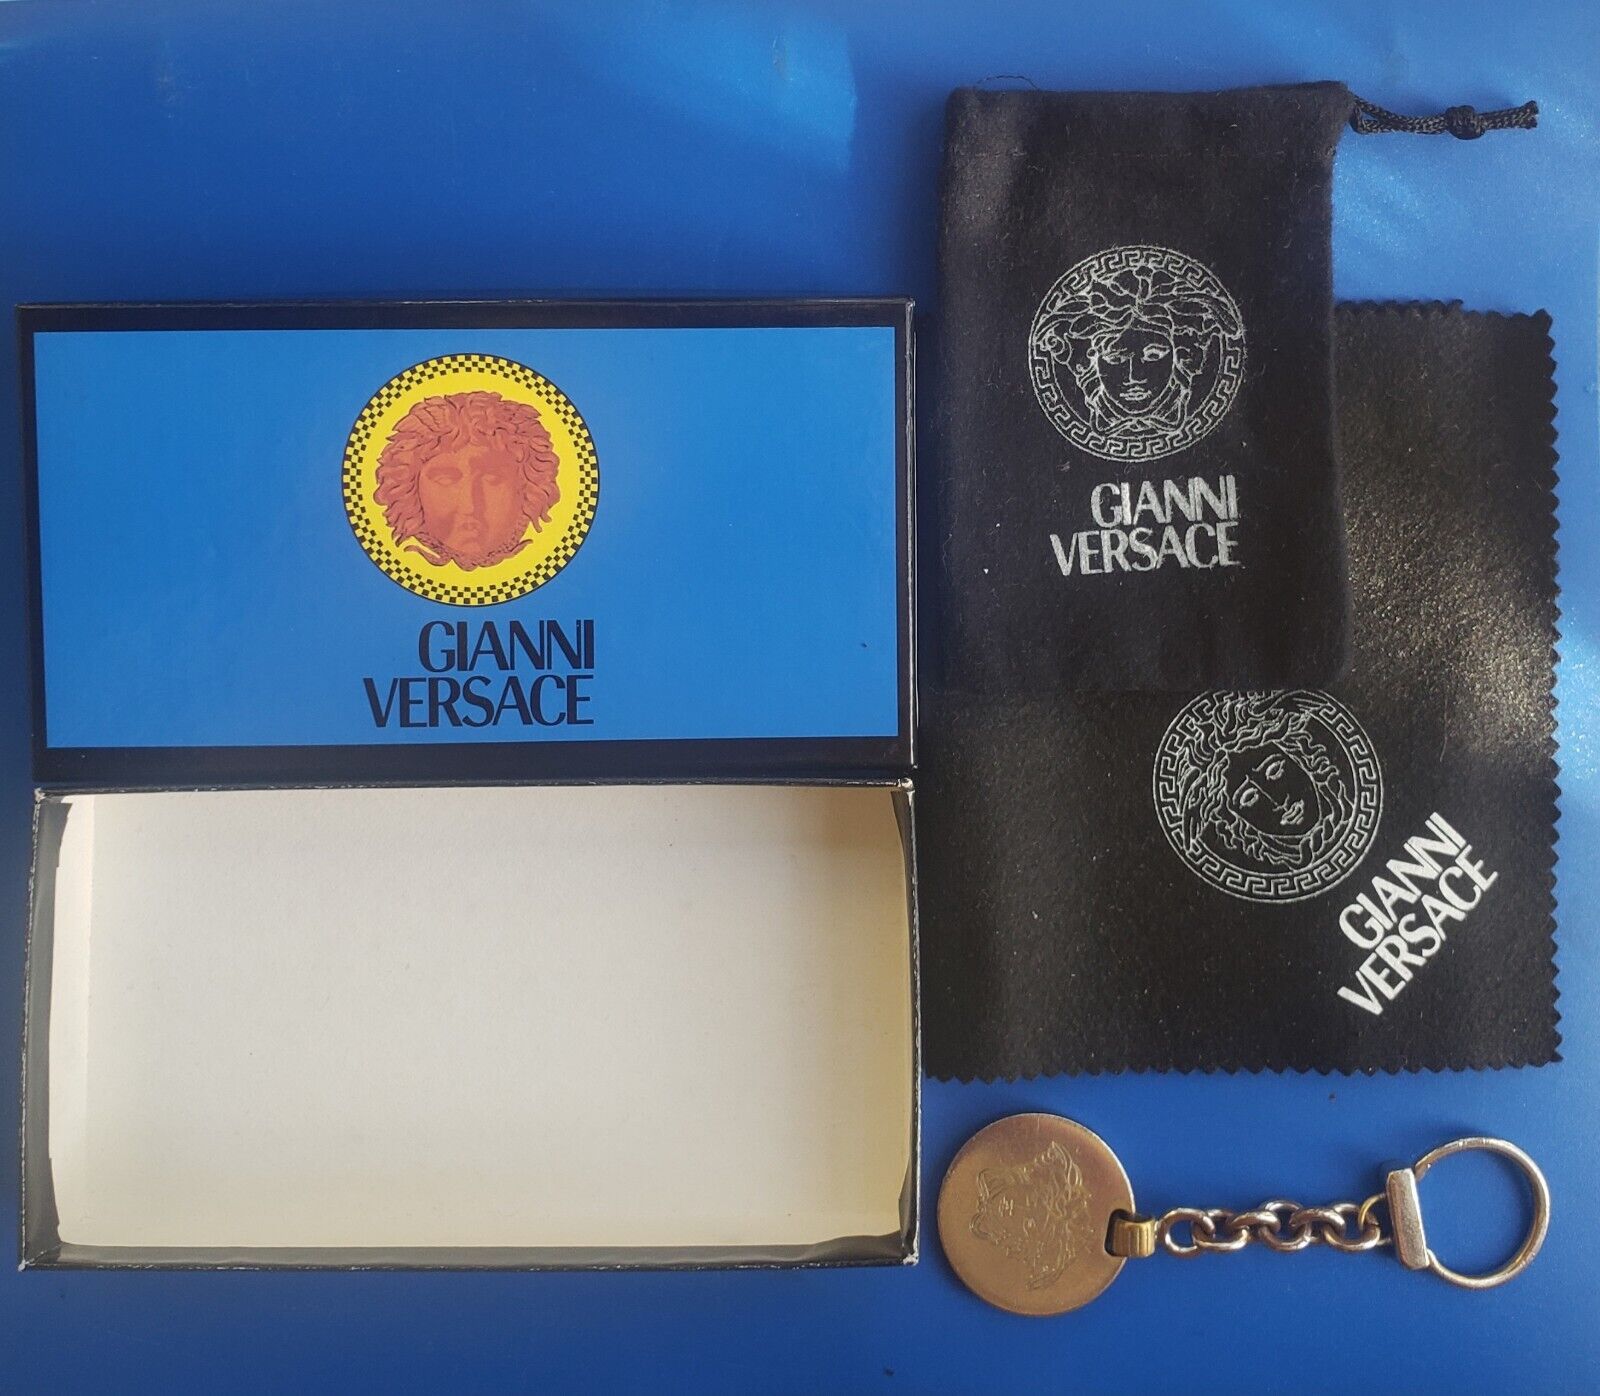 Vintage Silver Tone Gianni Versace Keychain with Pouch Bag/Cloth in Original Box